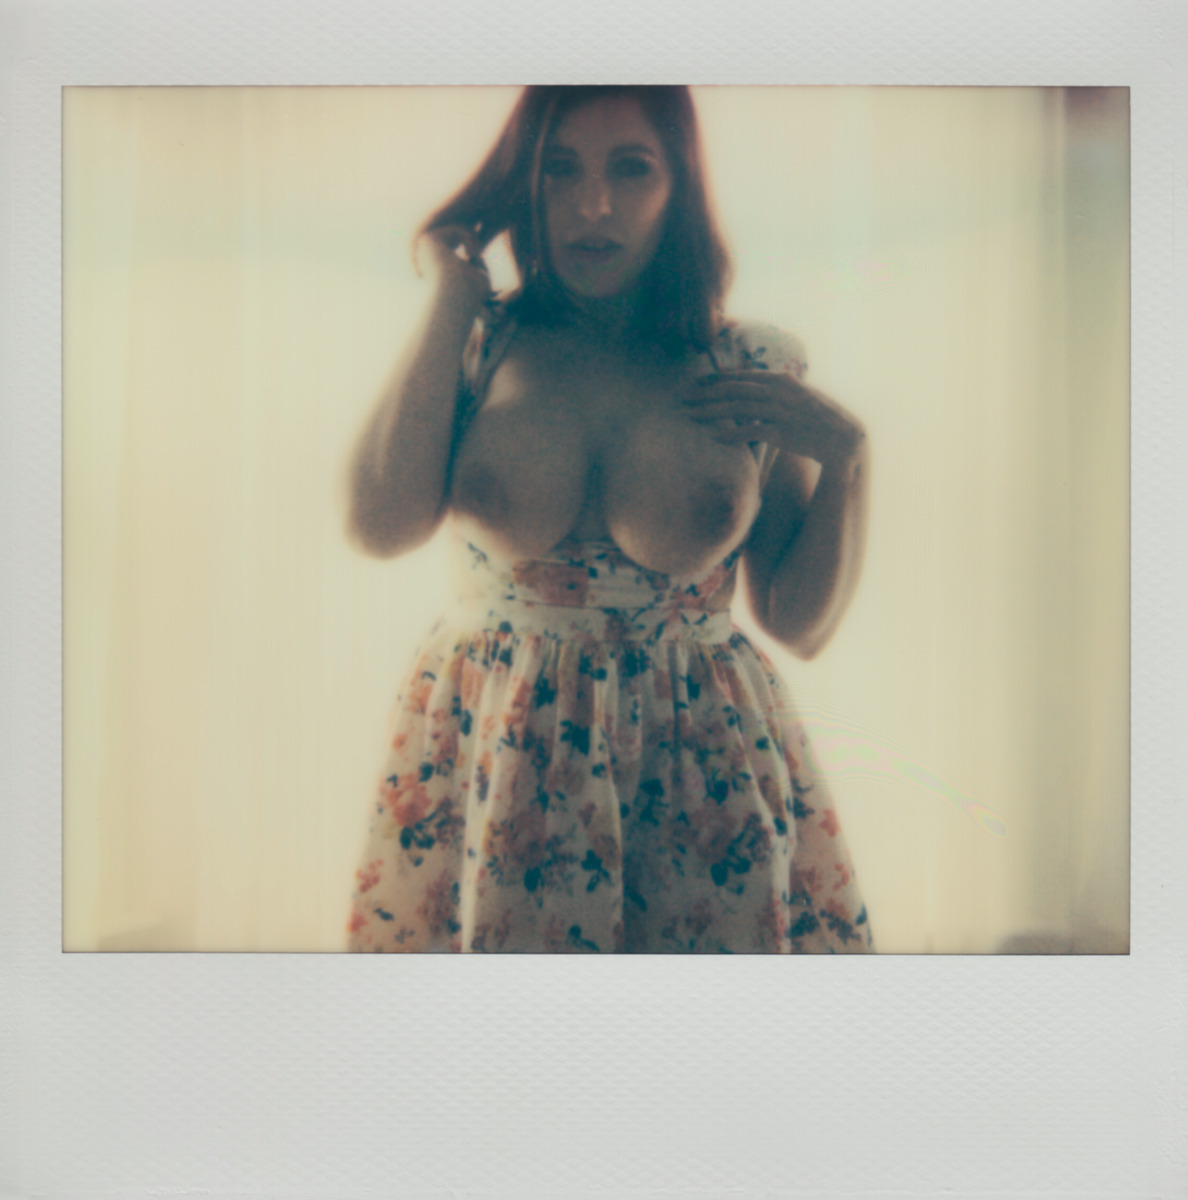 finchdown:  Eight original instant film shots of Selina Kyl are up for salehttp://finchlinden.com/impossible